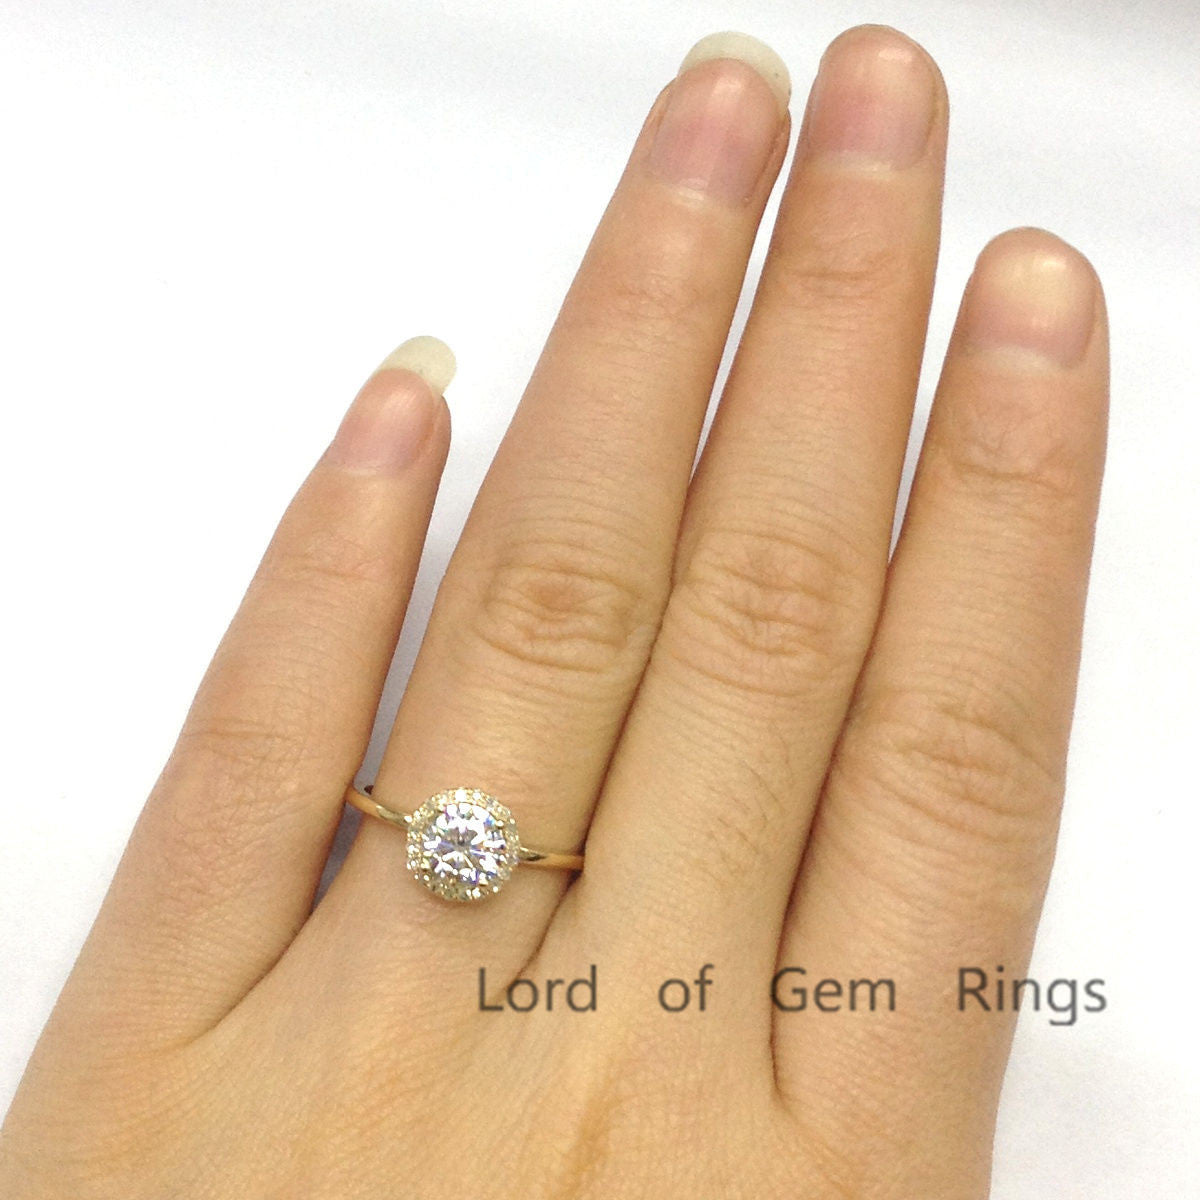 Round Moissanite Engagement Ring Pave Diamond Halo 14K Rose Gold 6.5mm - Lord of Gem Rings - 4